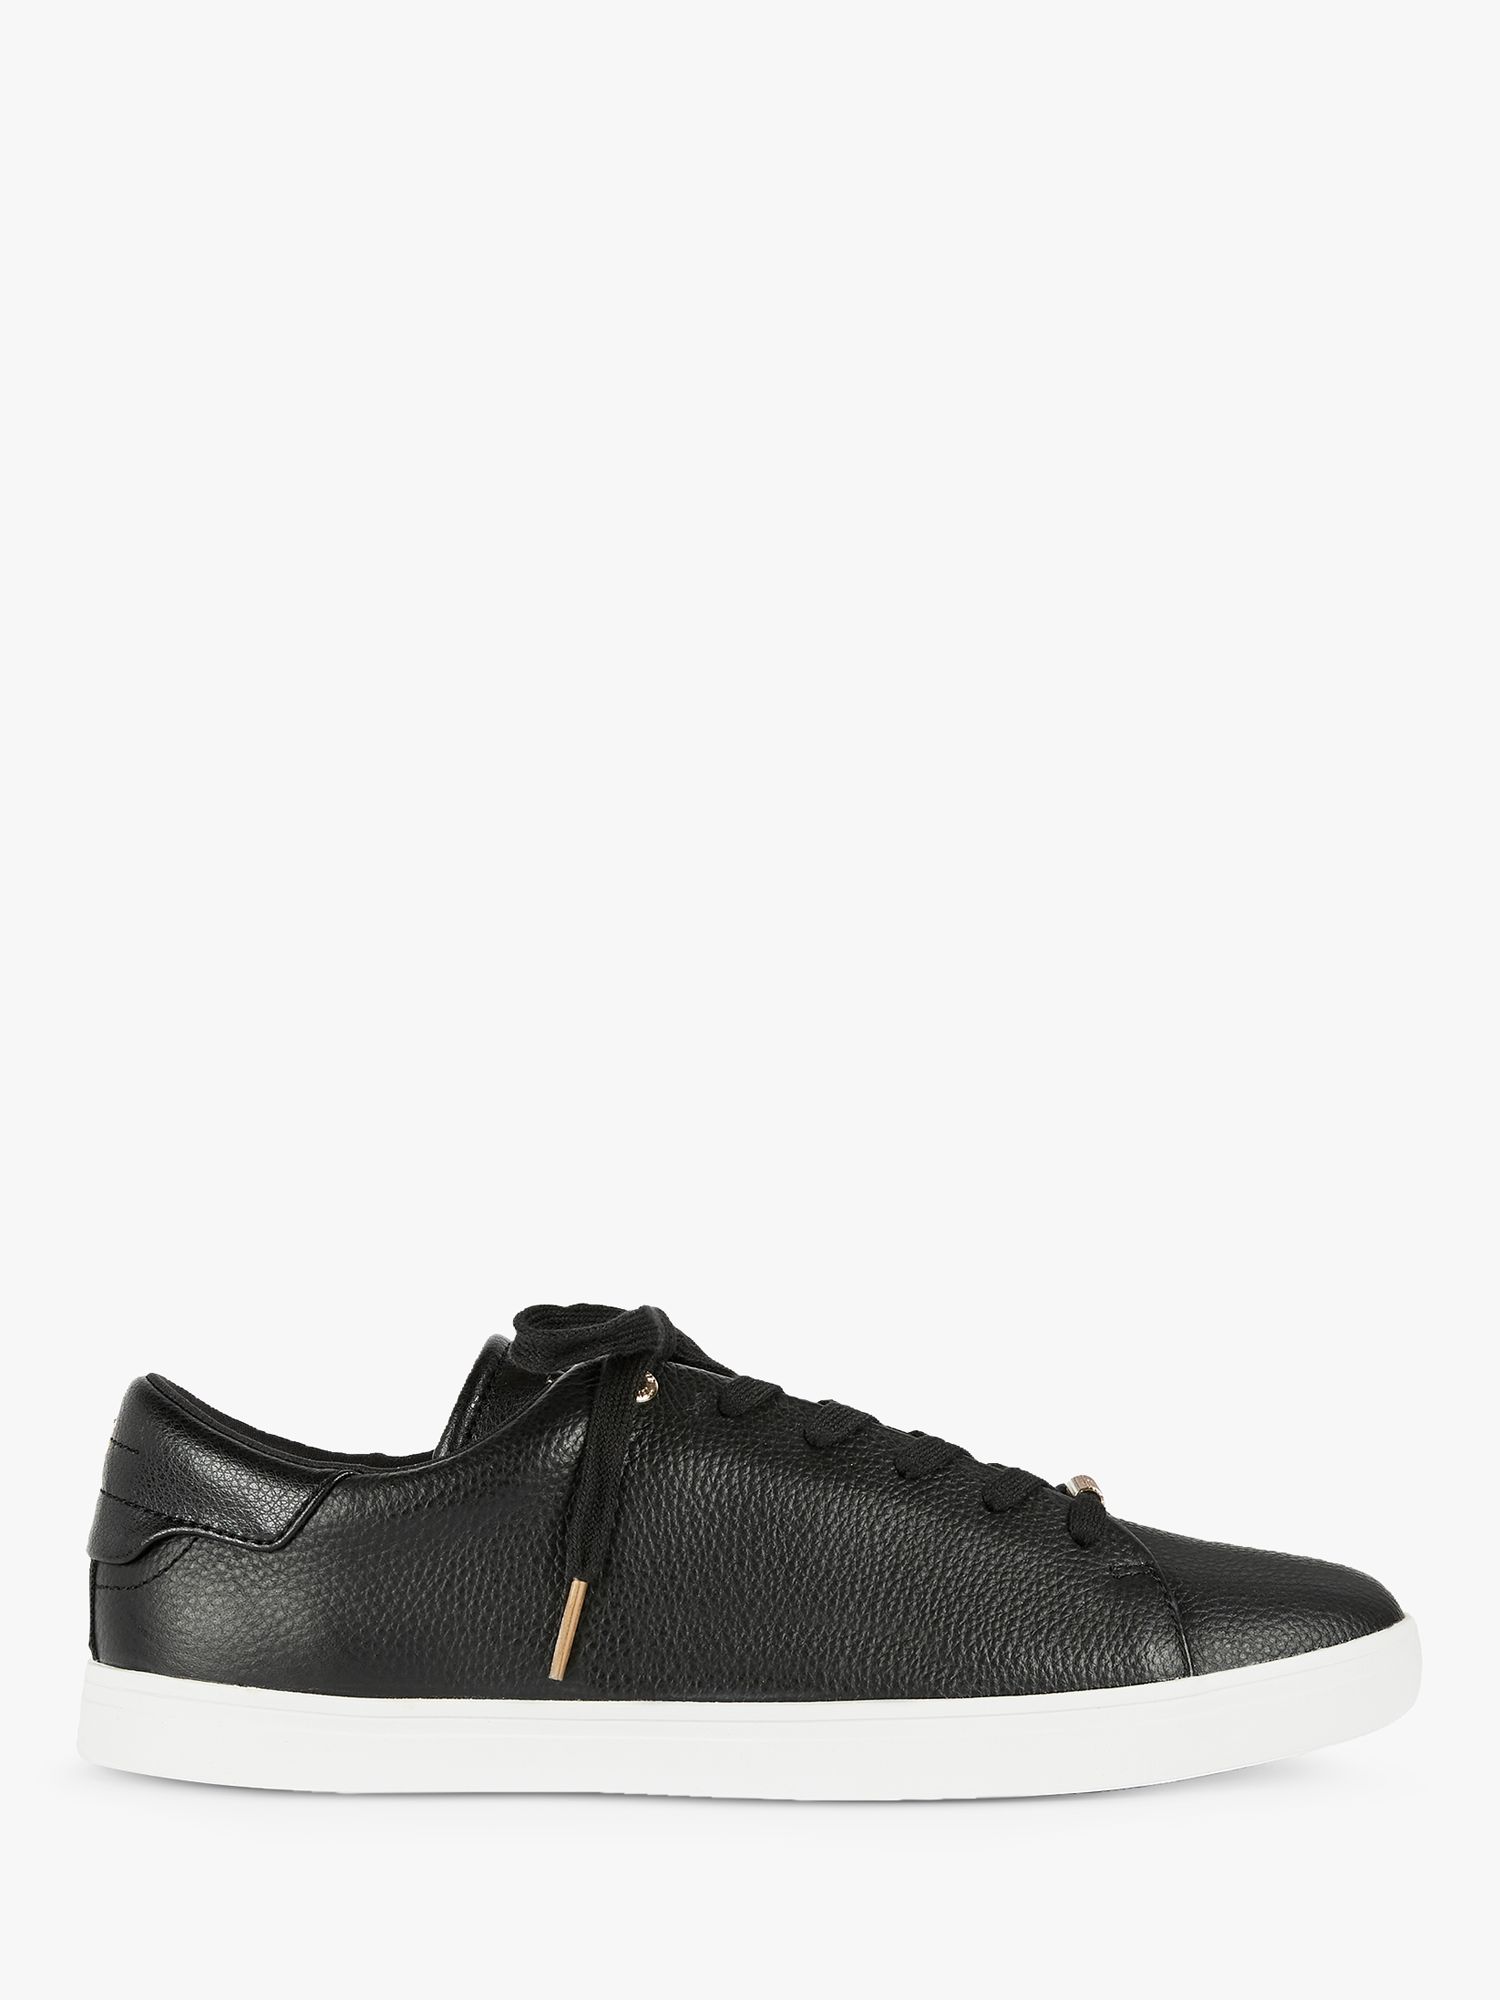 Ted Baker Feeka Low Top Leather Trainers, Black at John Lewis & Partners